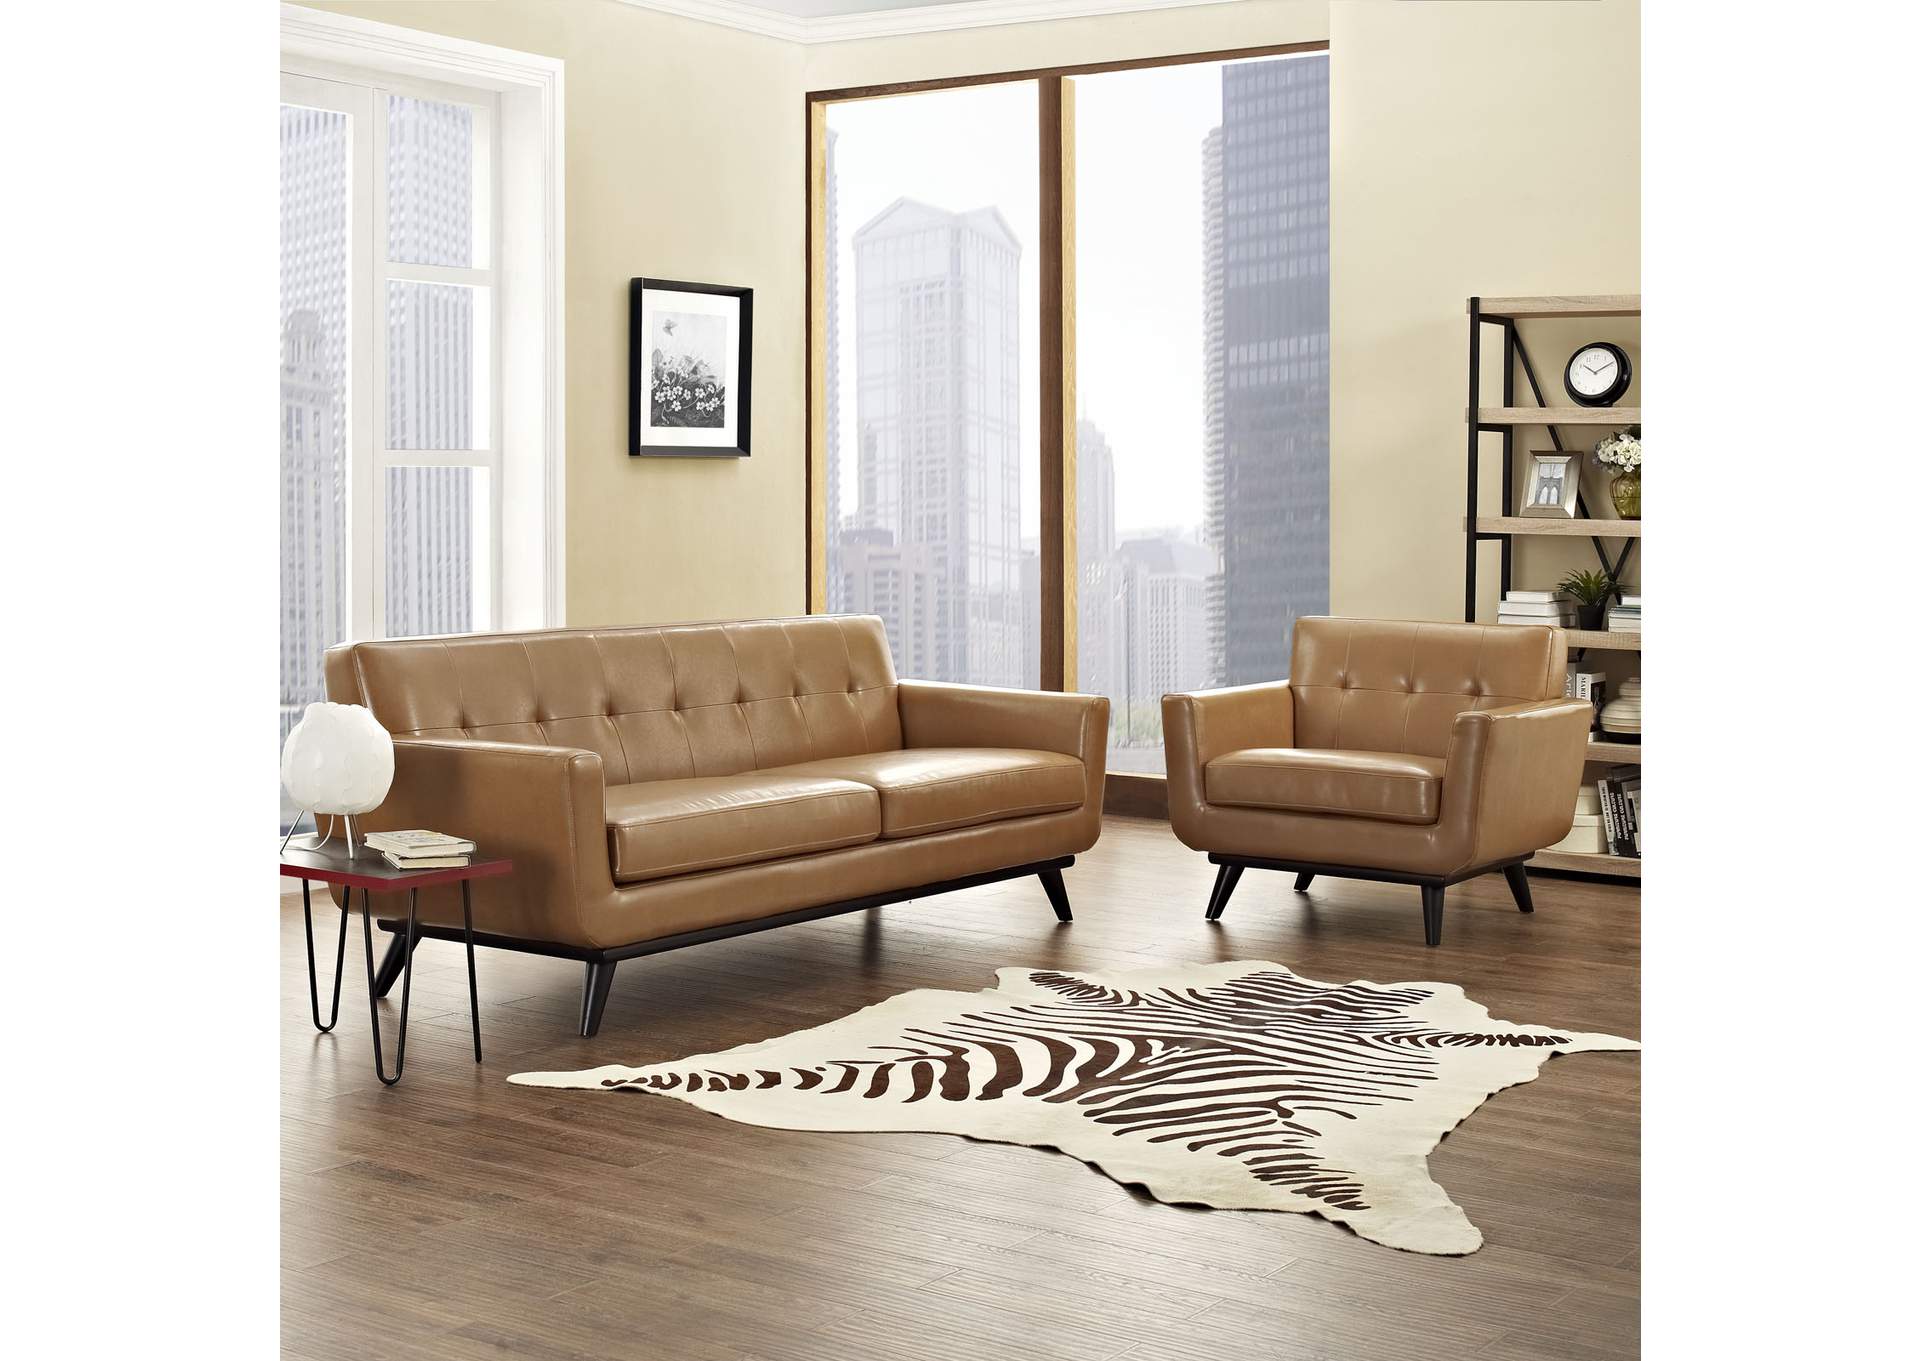 Engage Tan 2 Piece Leather Living Room Set,Modway